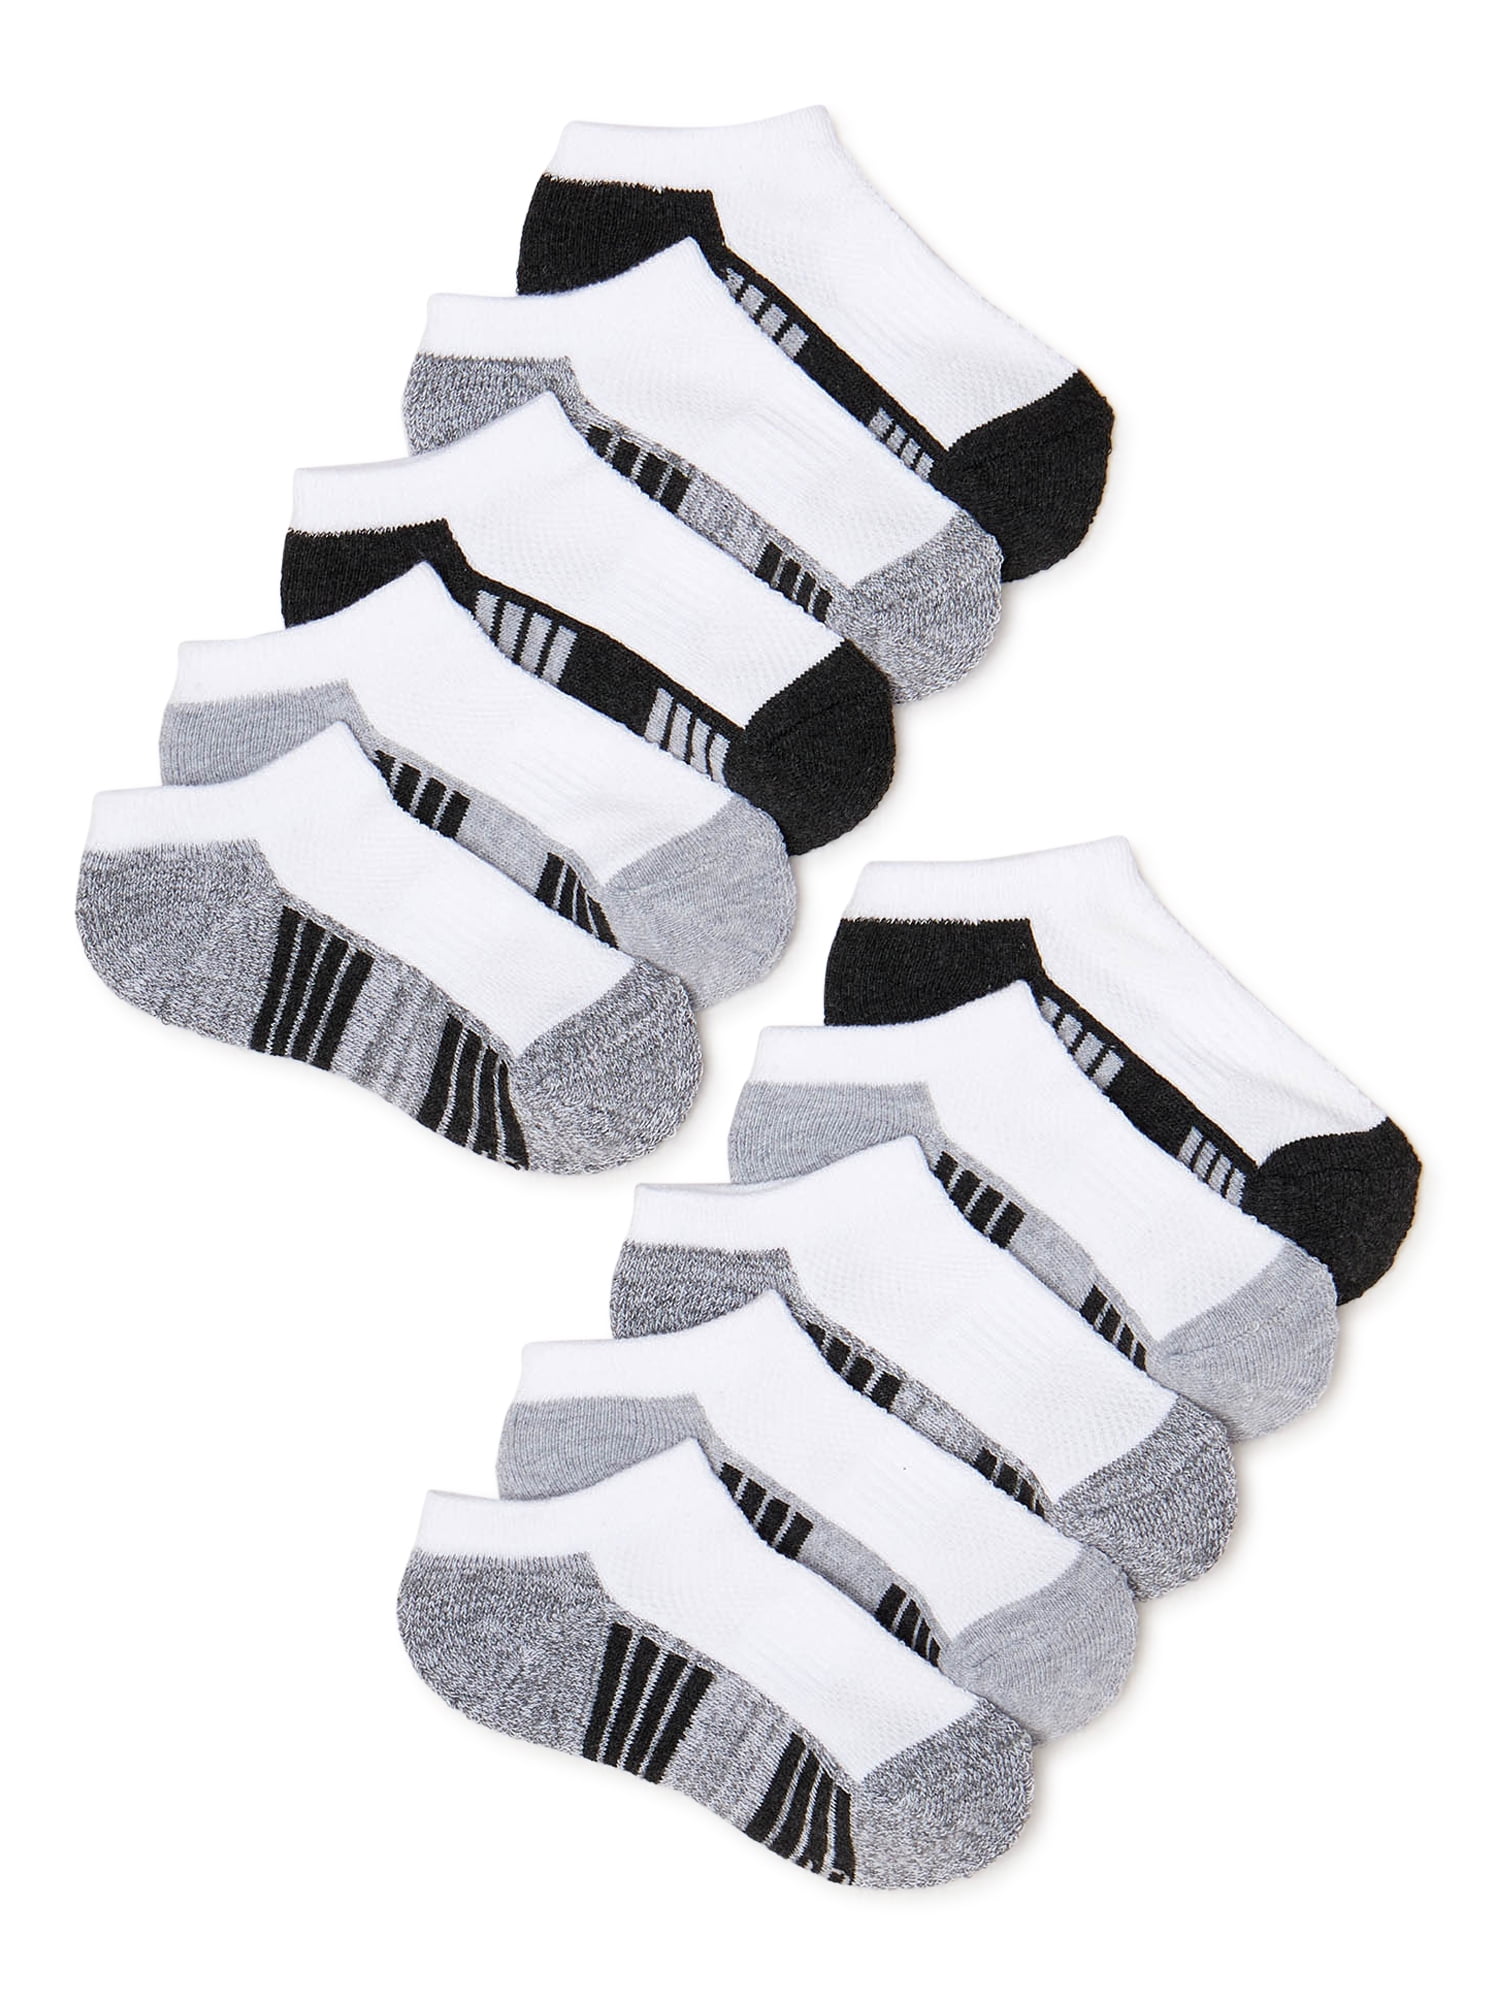 Athletic Works Boys Cushioned No Show Socks, 10-Pack S (4-8.5) - L (3-9 ...